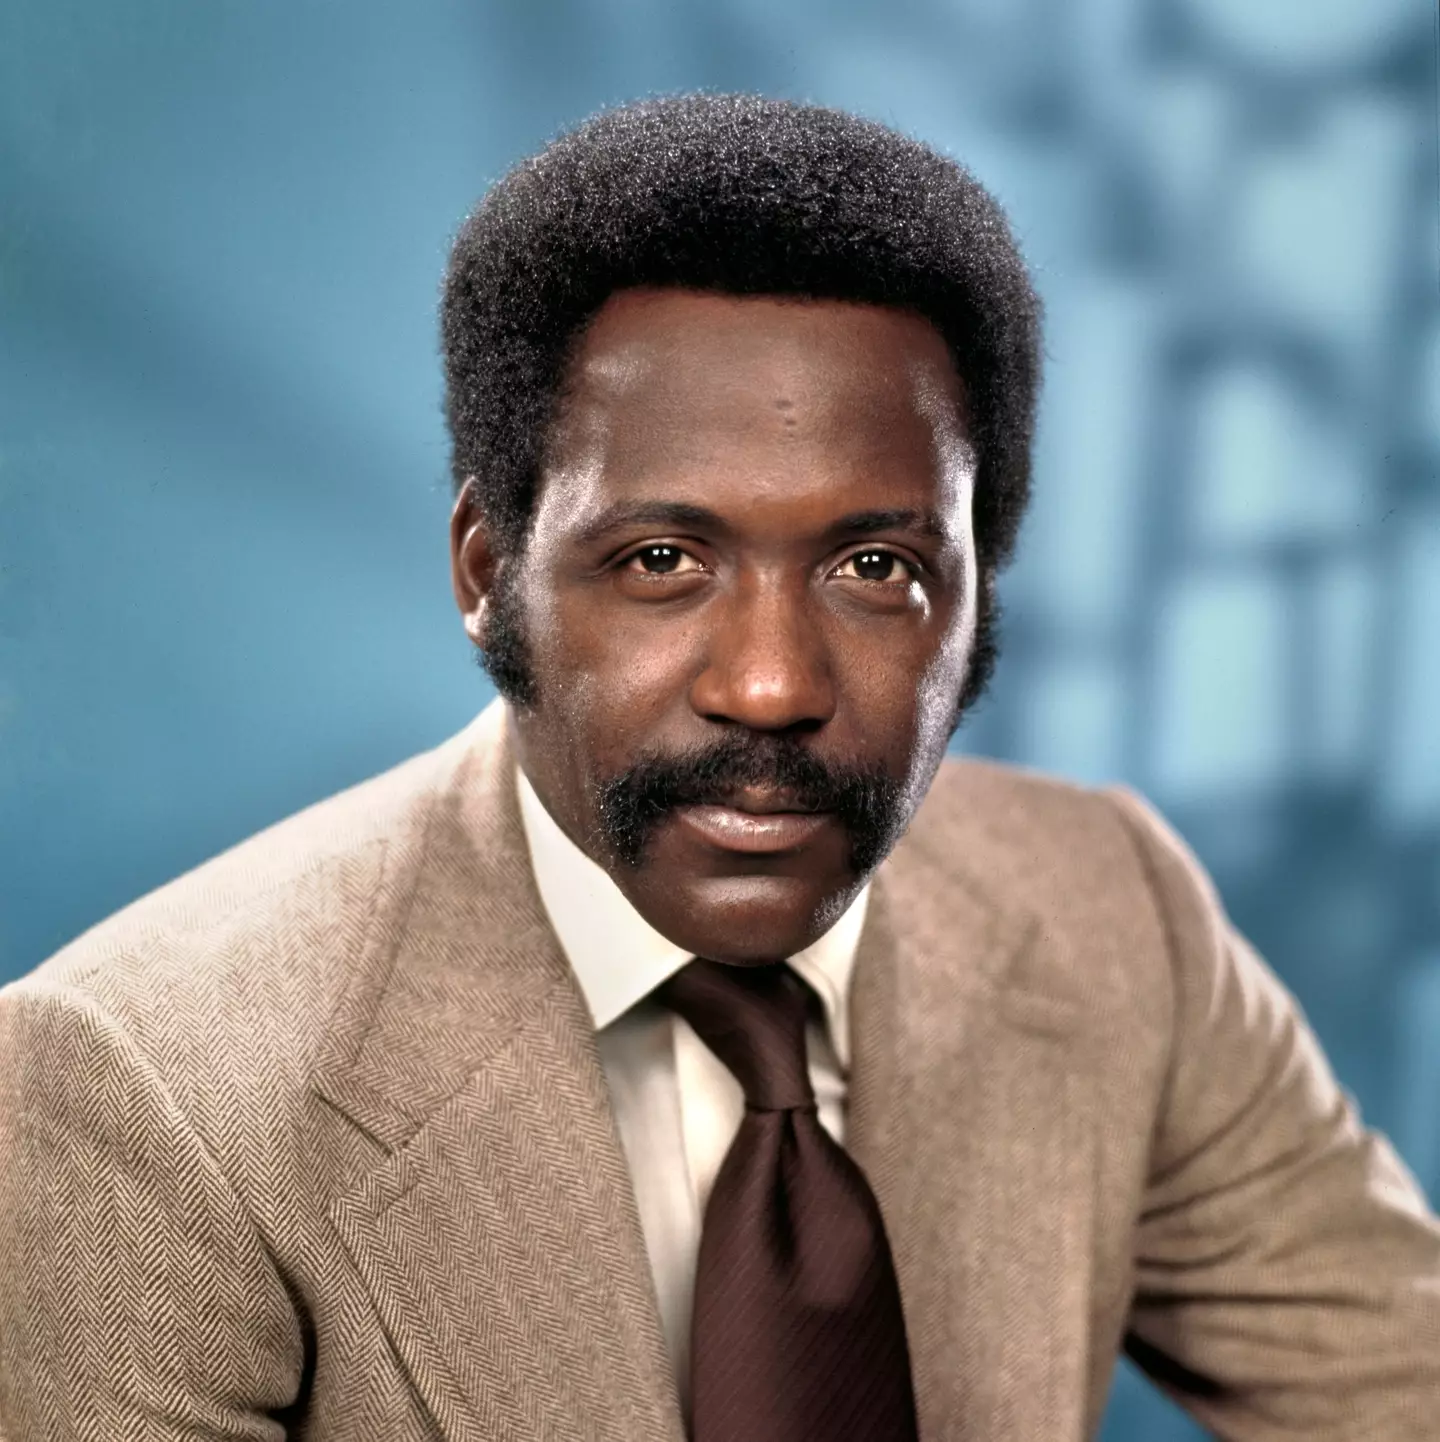 Roundtree was best known for playing the leading role in Shaft.